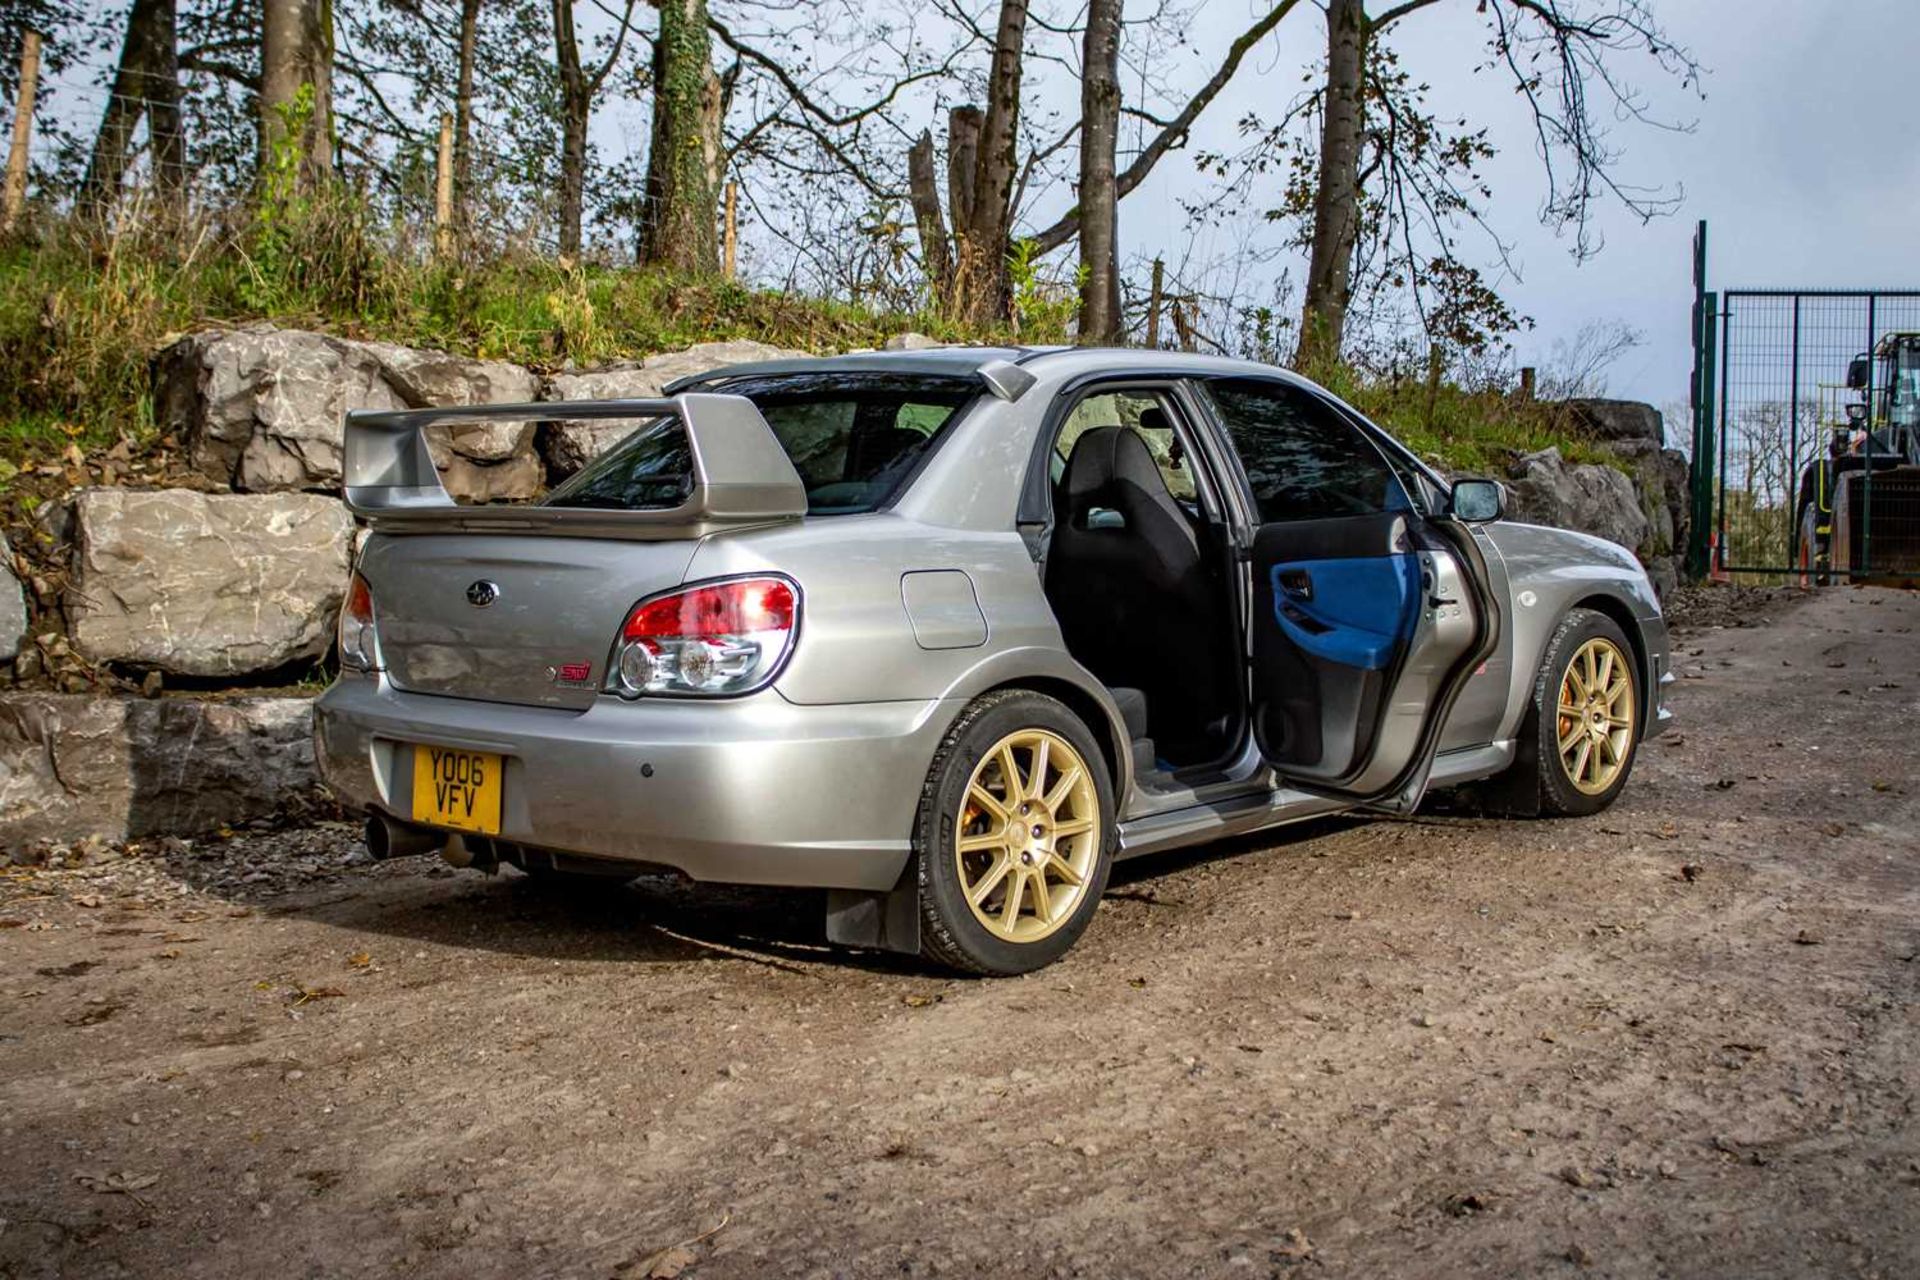 2006 Subaru Impreza WRX STi Featuring a plethora of desirable upgrades, supported by a dyno printout - Image 23 of 103